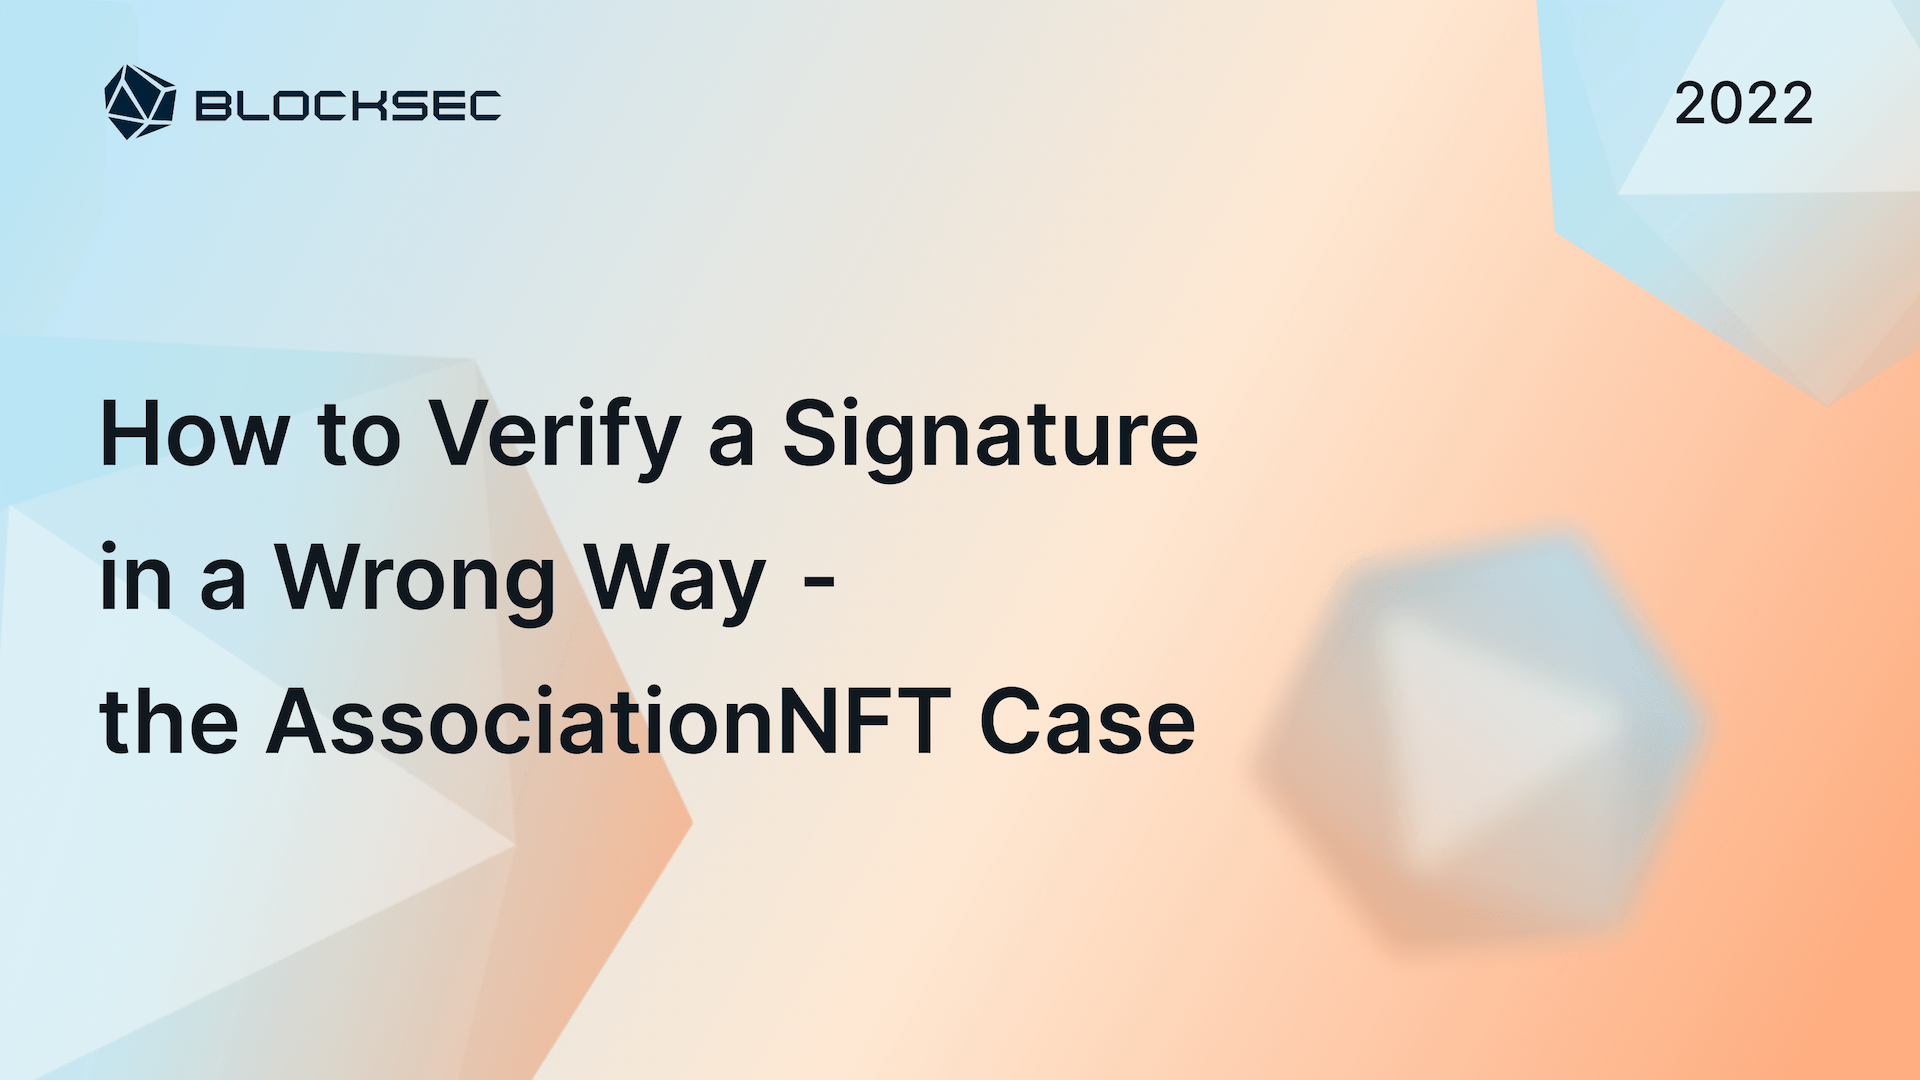 How to Verify a Signature in a Wrong Way — The AssociationNFT Case